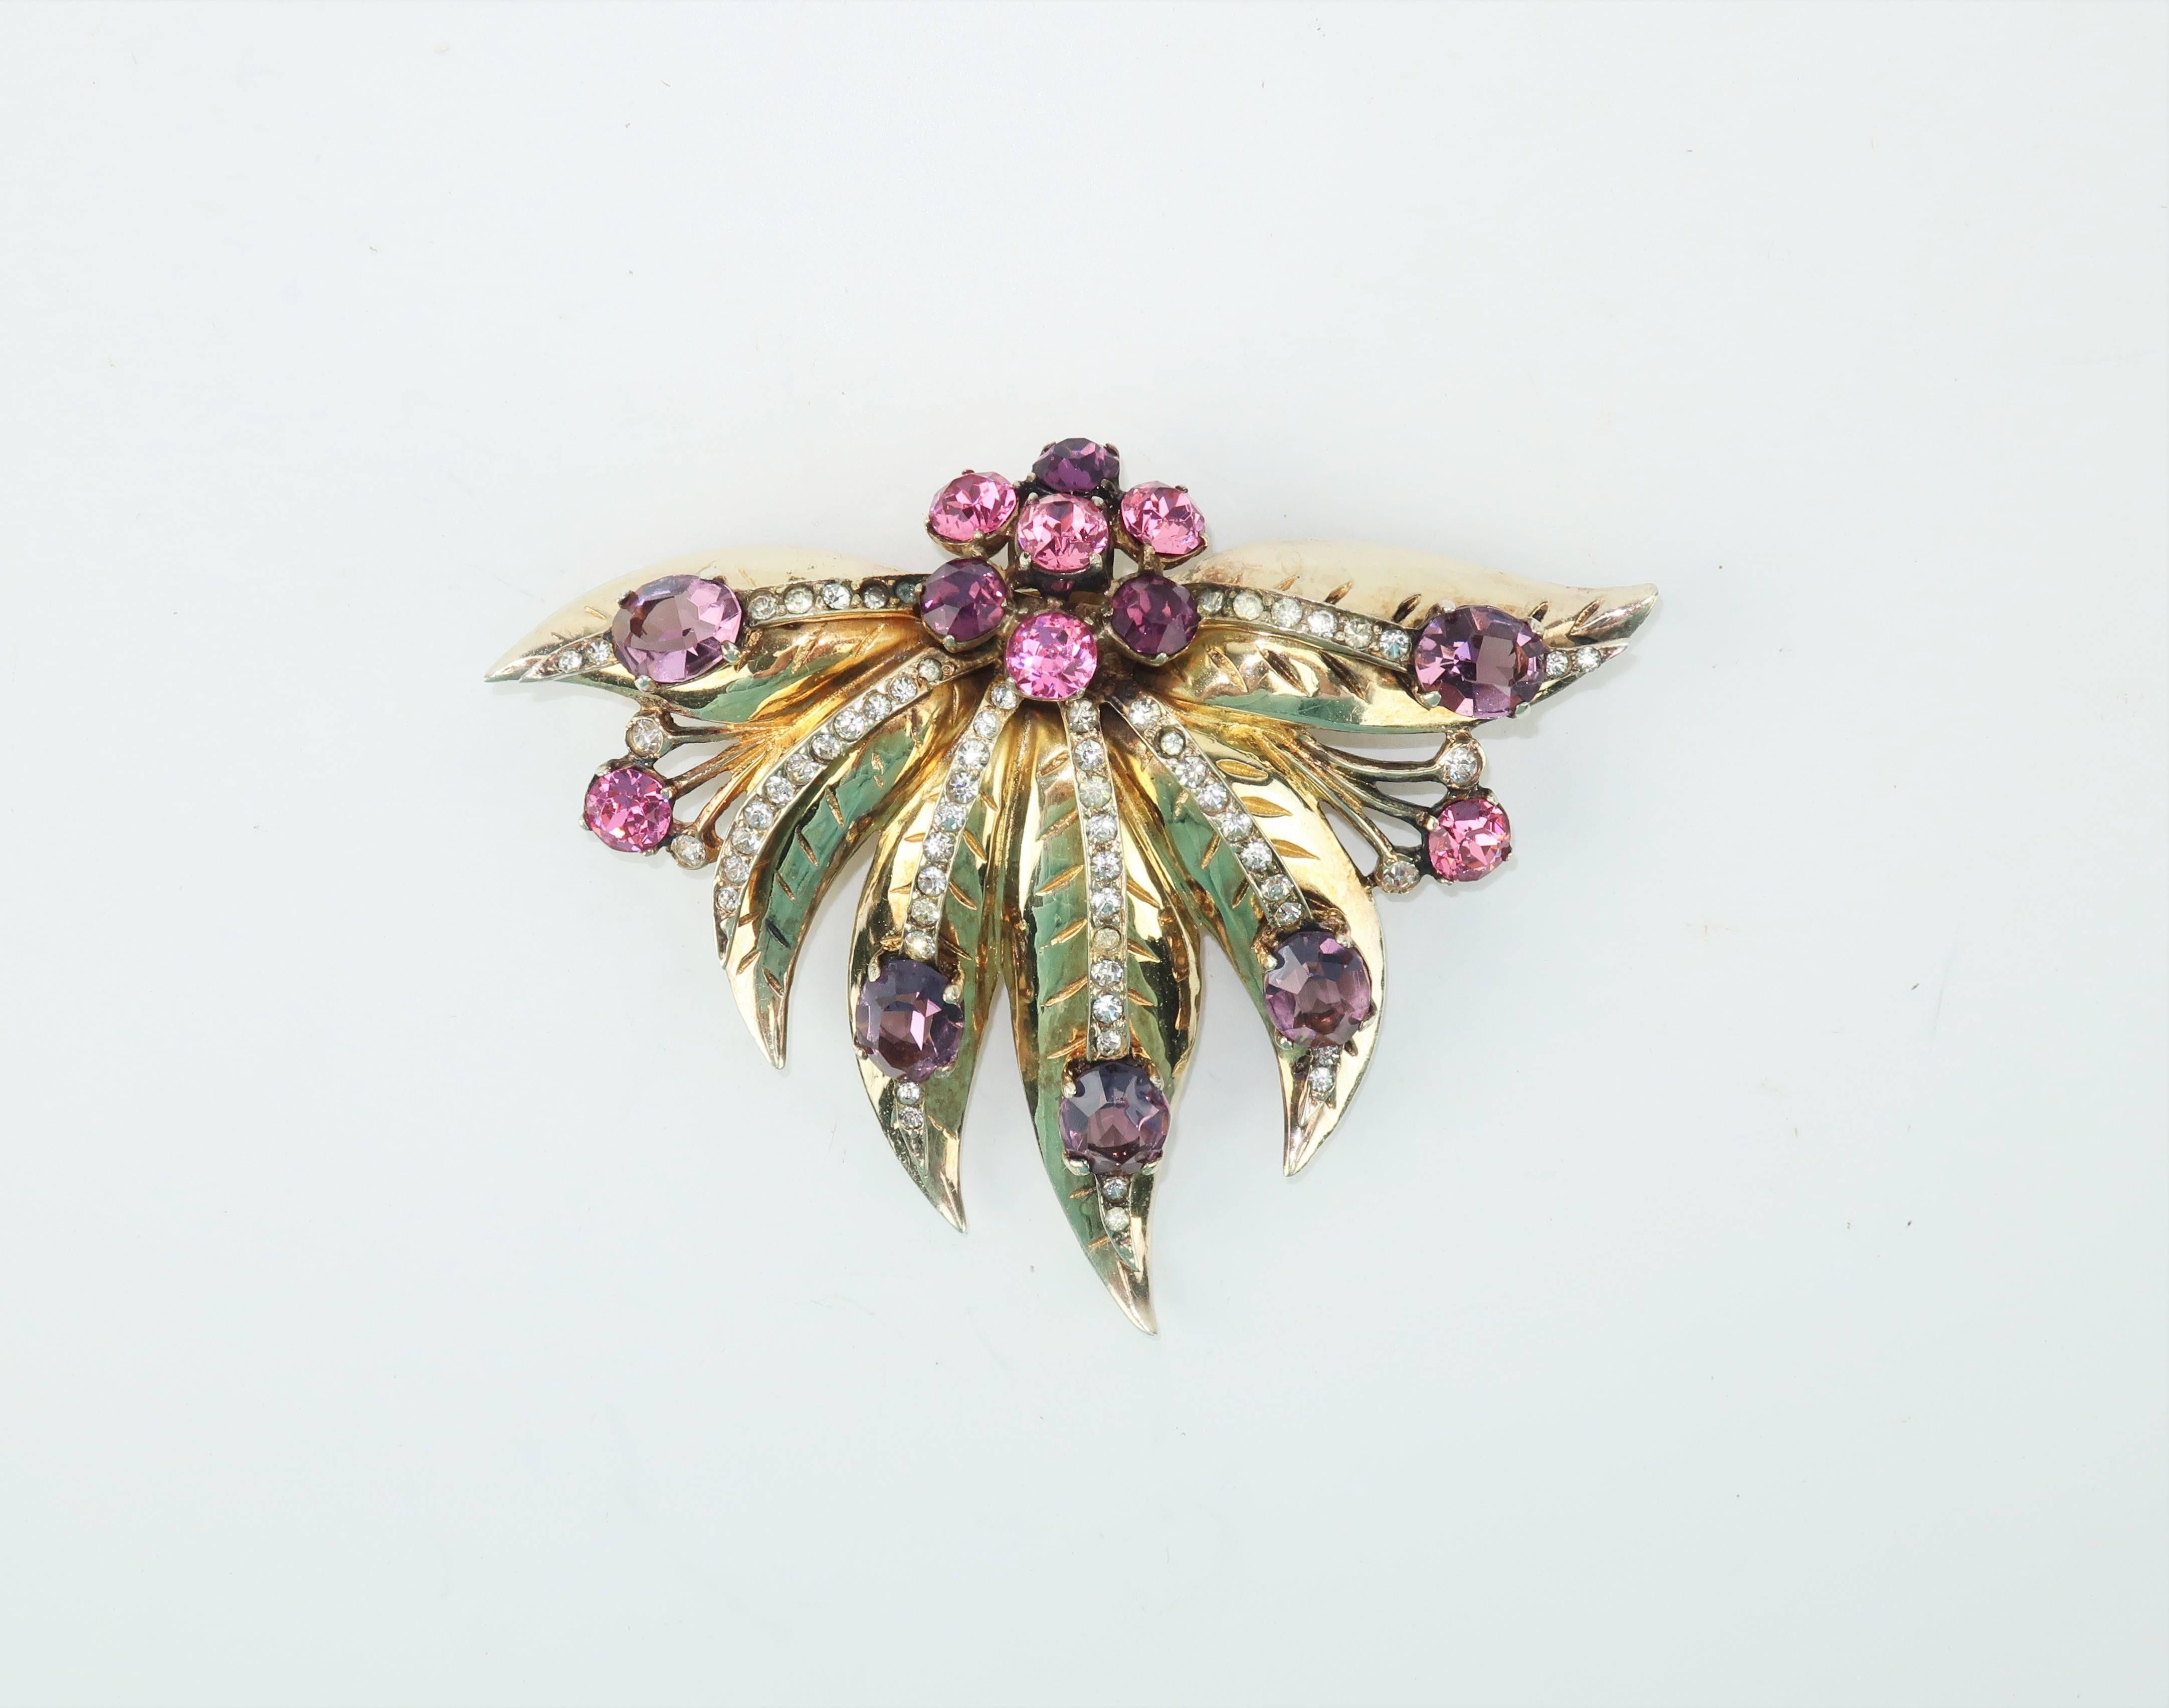 Eisenberg originally produced jewelry to accessorize their clothing line and though their fashions were popular, the brilliant pieces of costume jewelry were the real showstoppers. This C.1940 fur clip brooch is made with all the refined details of